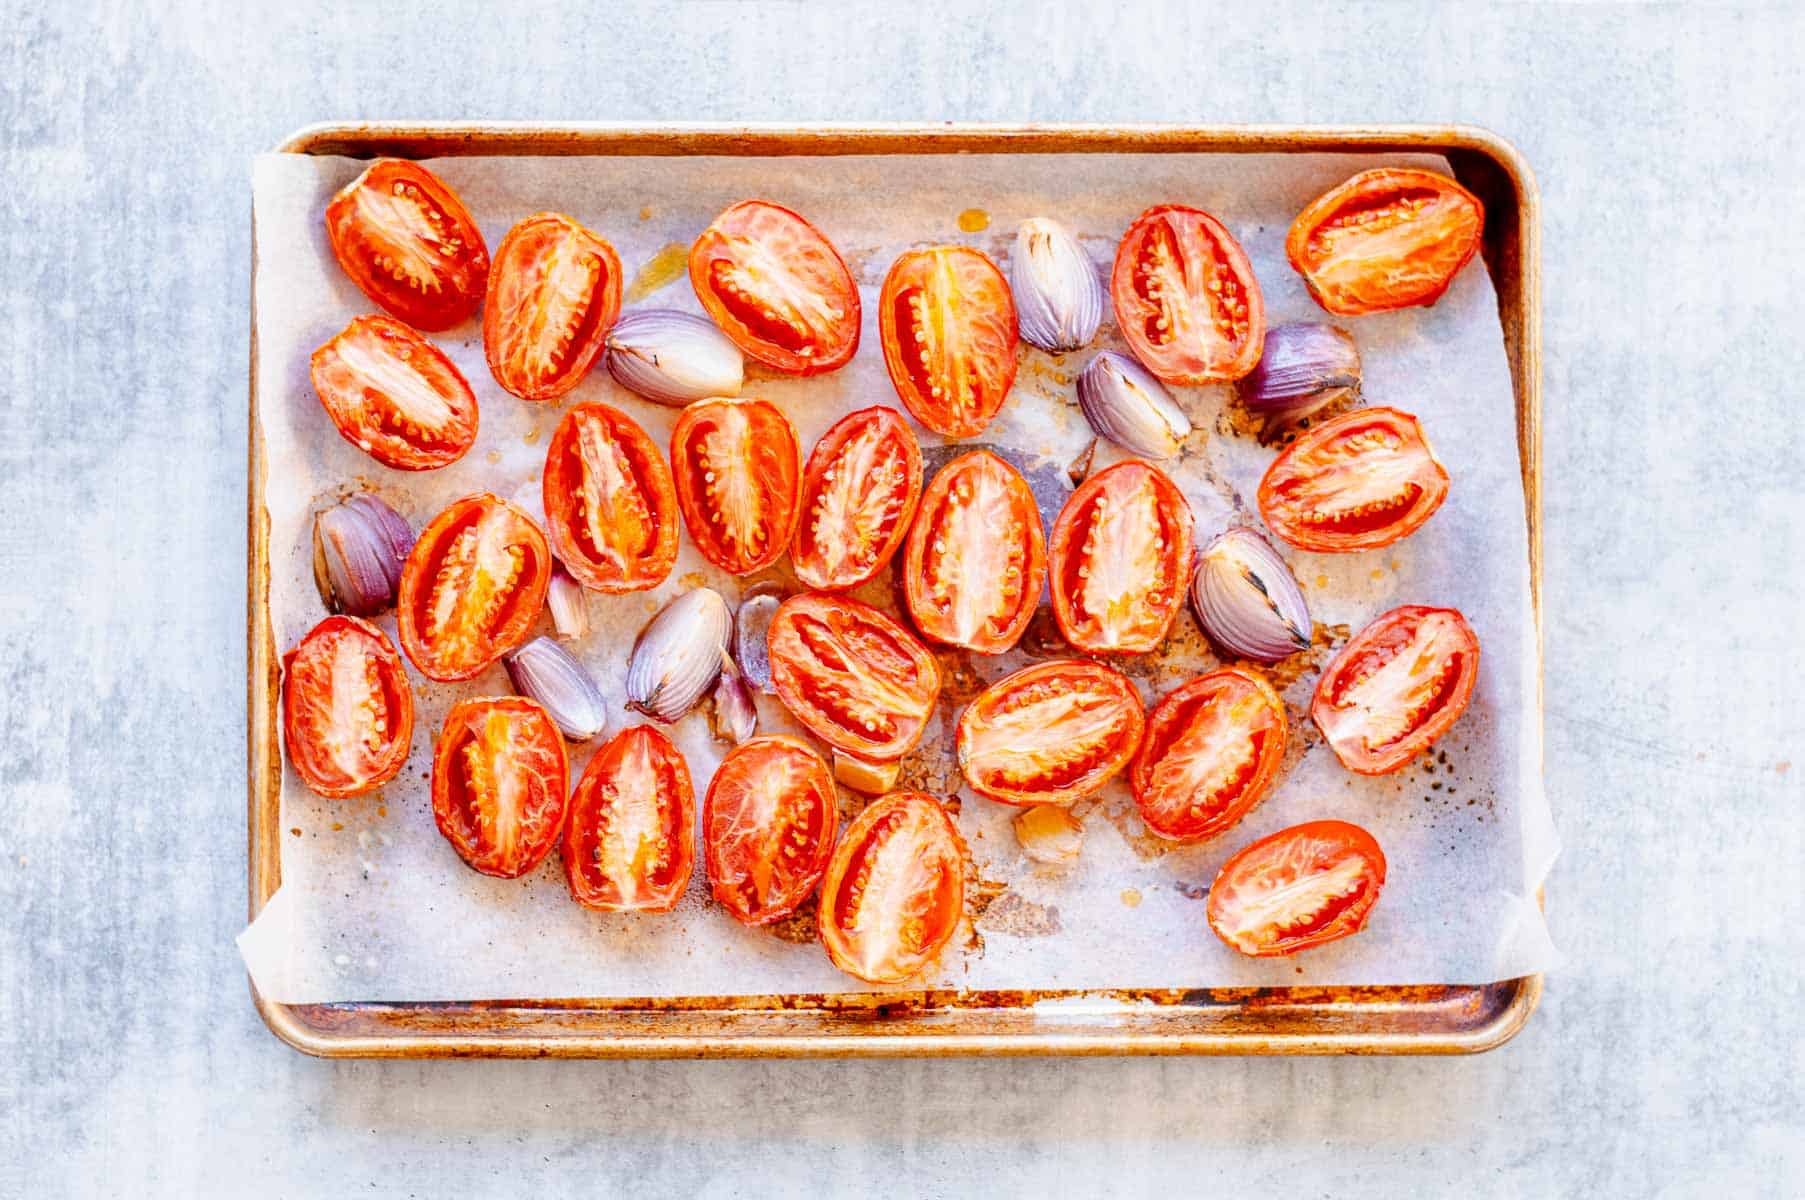 Roasted tomatoes, red onion and garlic on a baking tray.